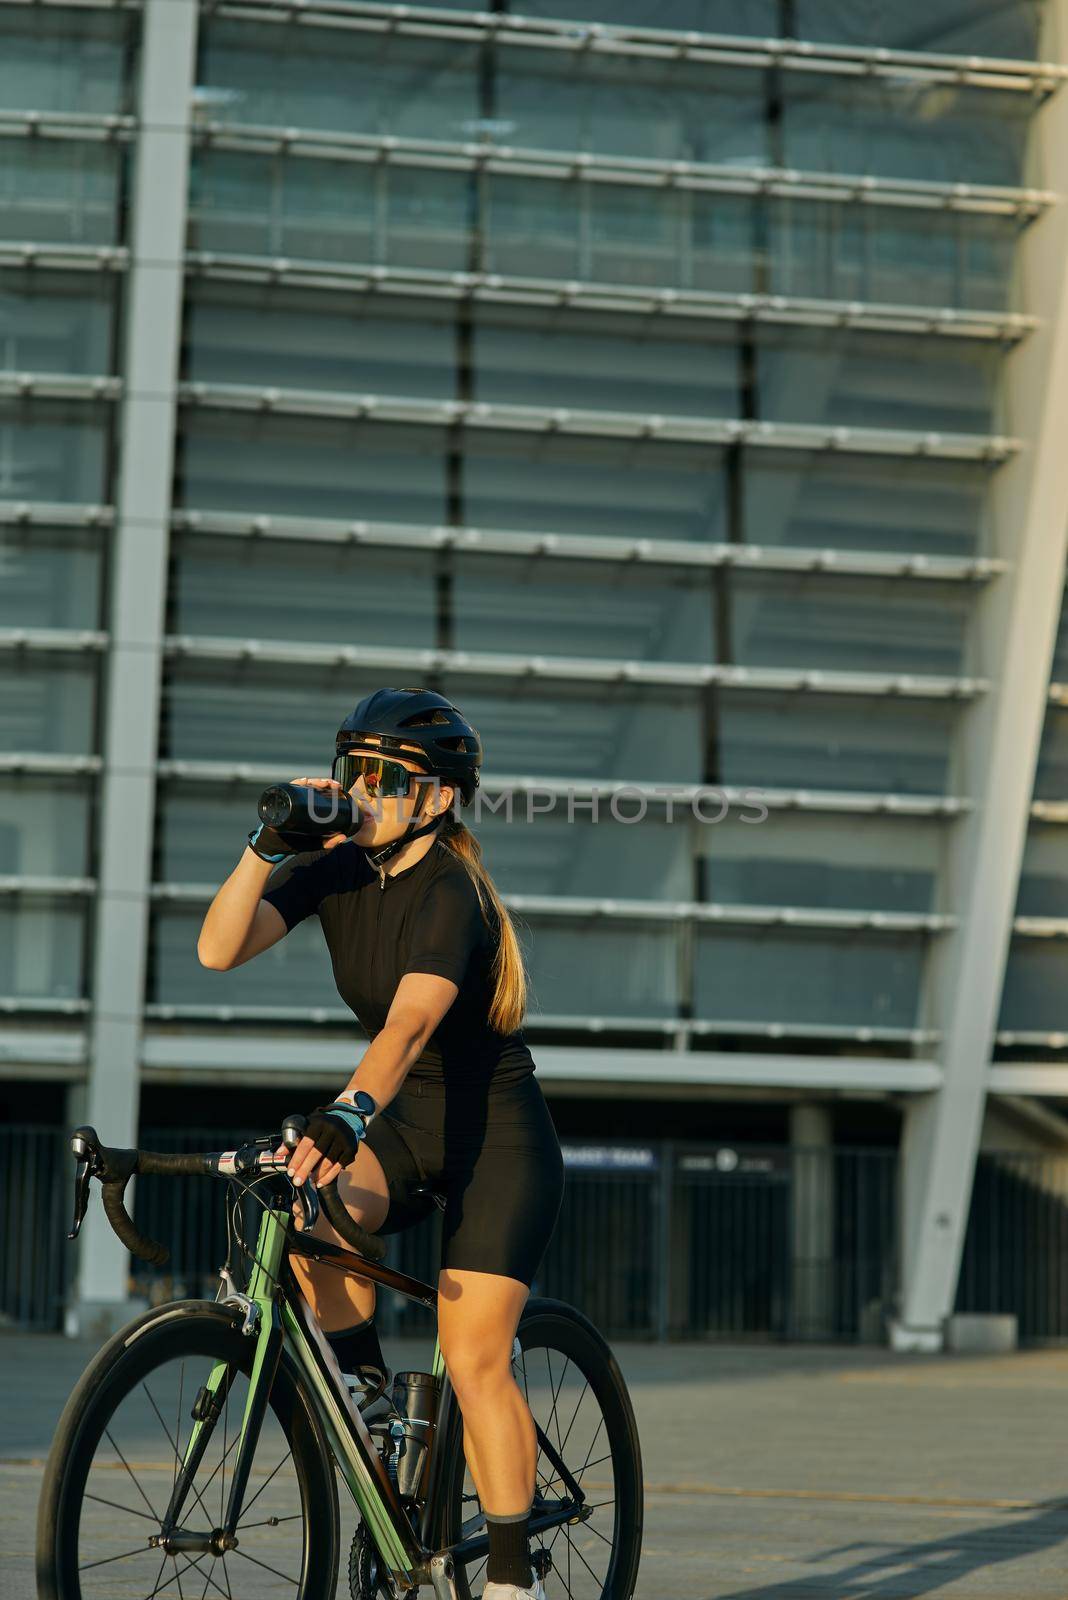 Professional female cyclist in black cycling garment and protective gear drinking water while riding bicycle in city, training outdoors on a warm day. Urban lifestyle, sports concept